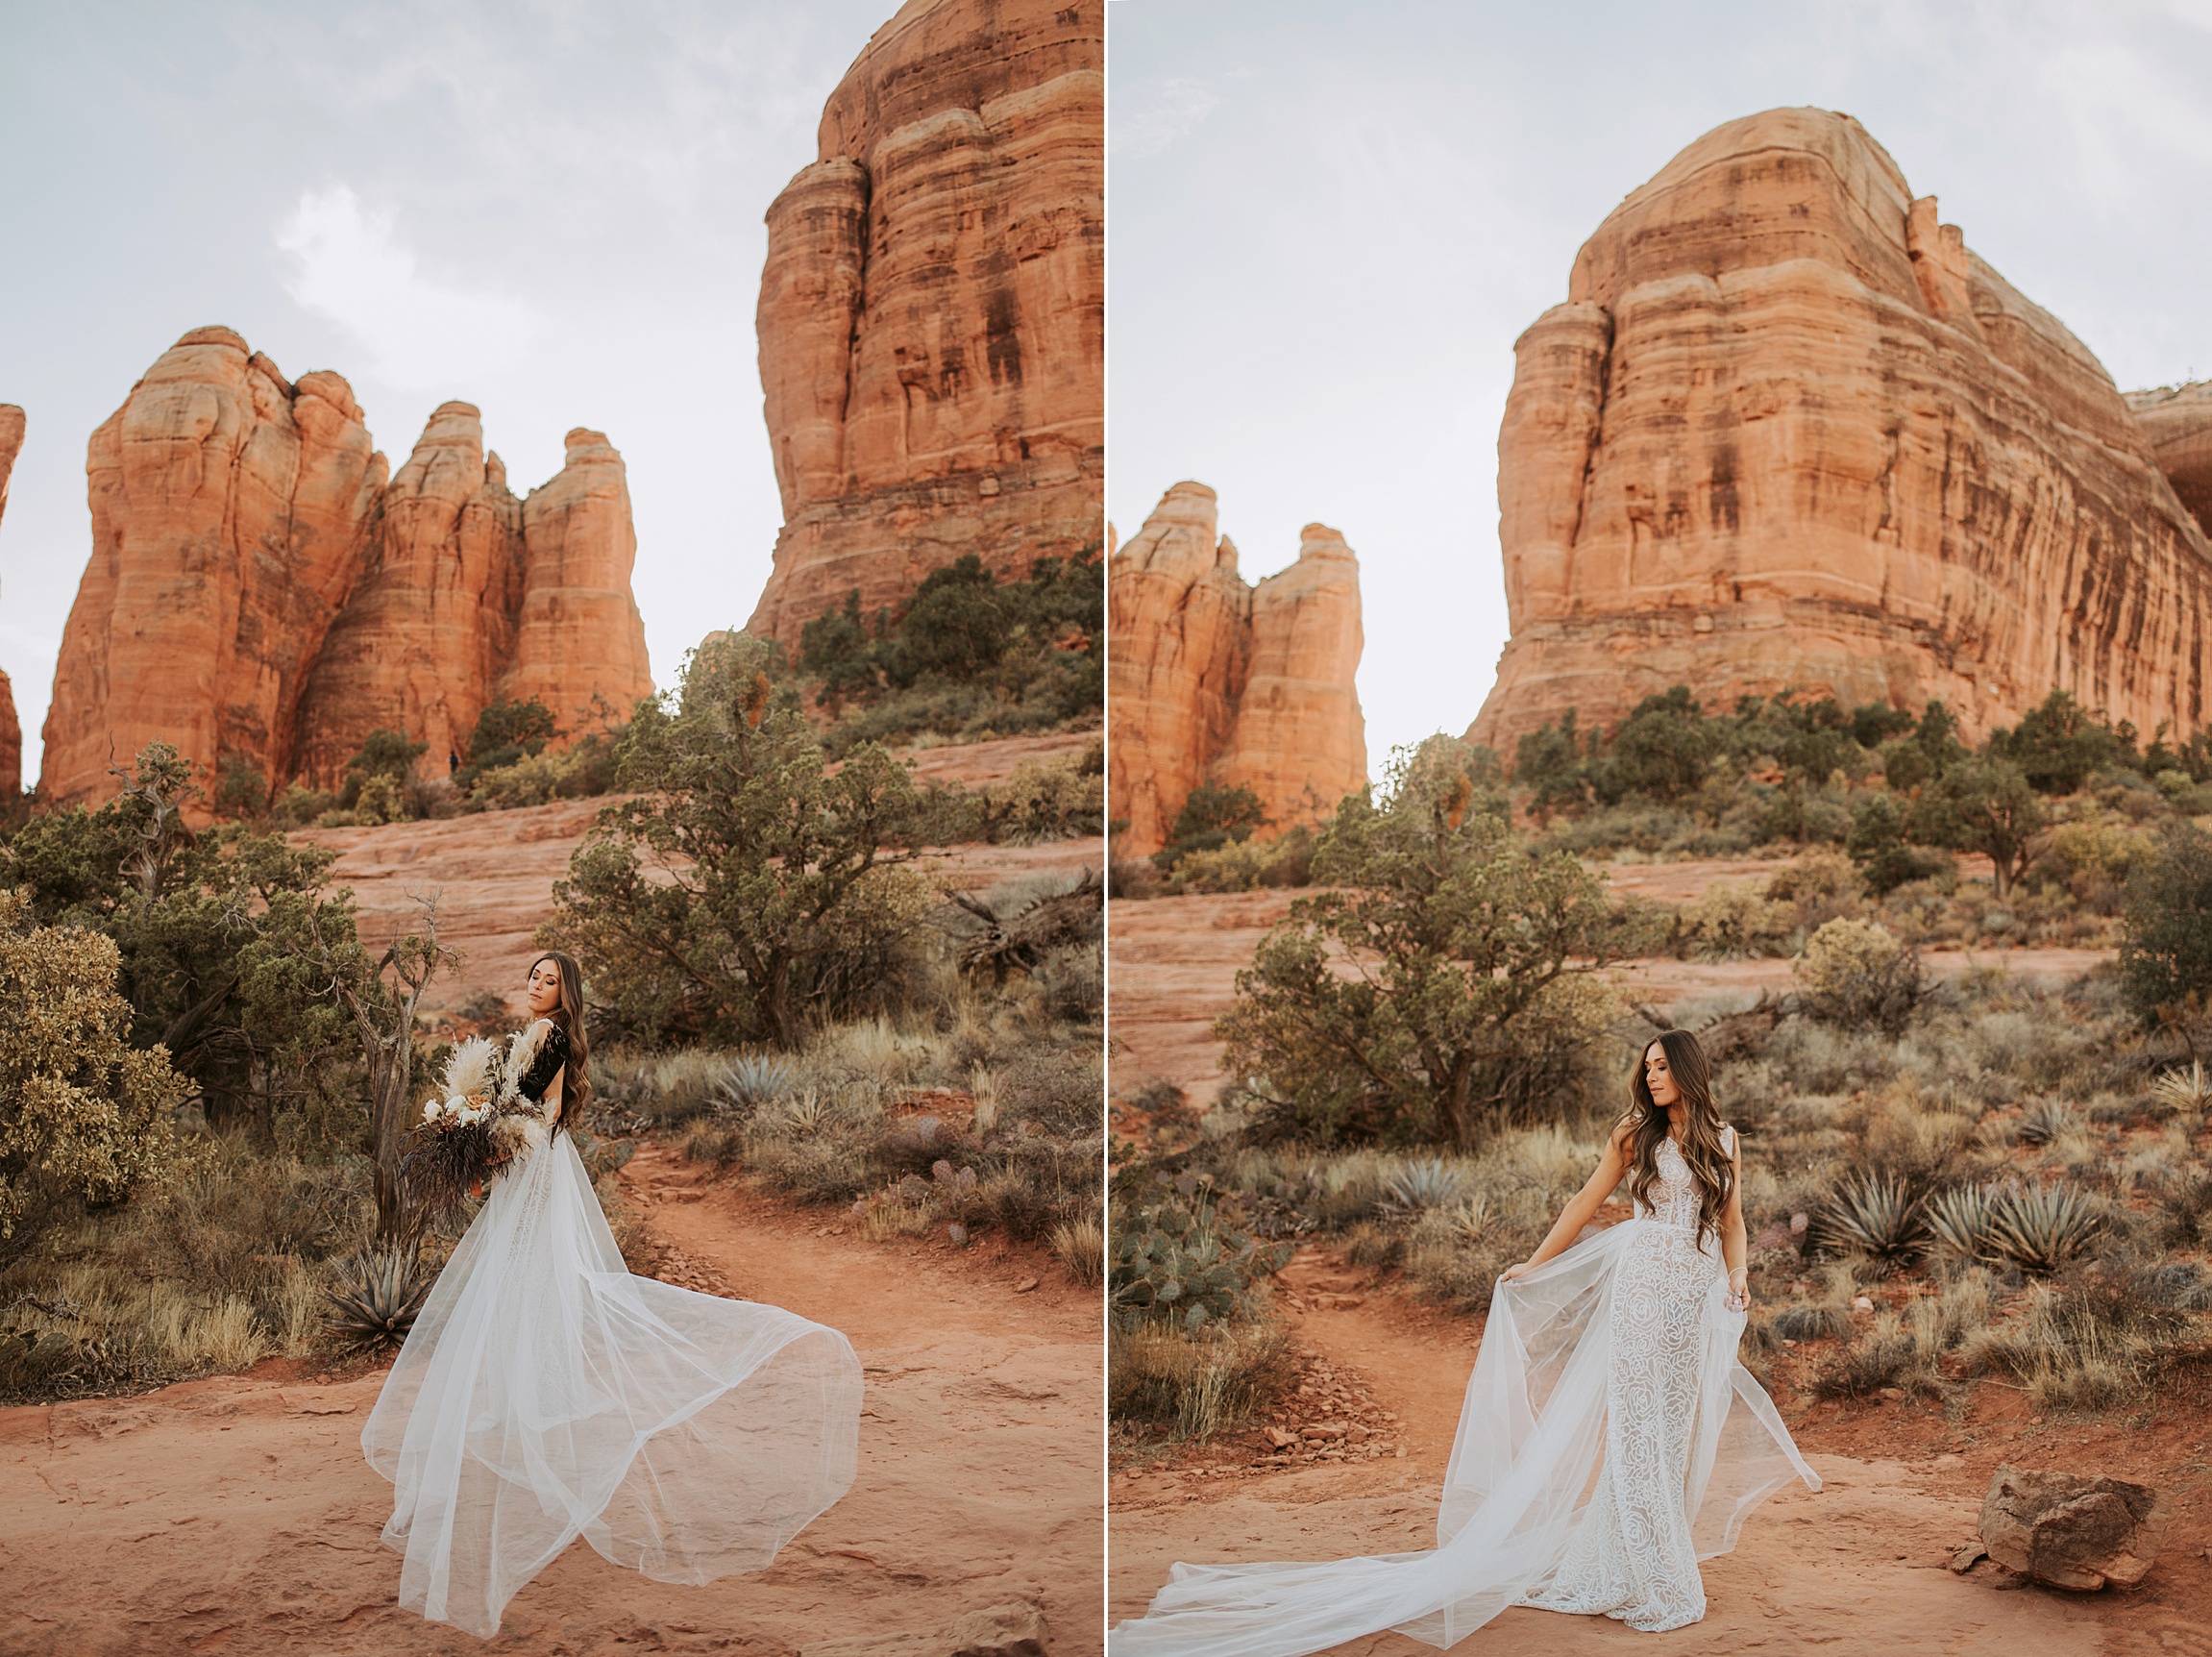 Engagement in Sedona AZ, Elopement in Sedona, Bride and Groom, Harley Davidson Motorcycle, Le Laurier Bridal, Adventurous Elopement, Arizona Wedding Photographer, Engaged, Cathedral Rock Engagement, Cathedral Rock Elopement, Bohemian Bride